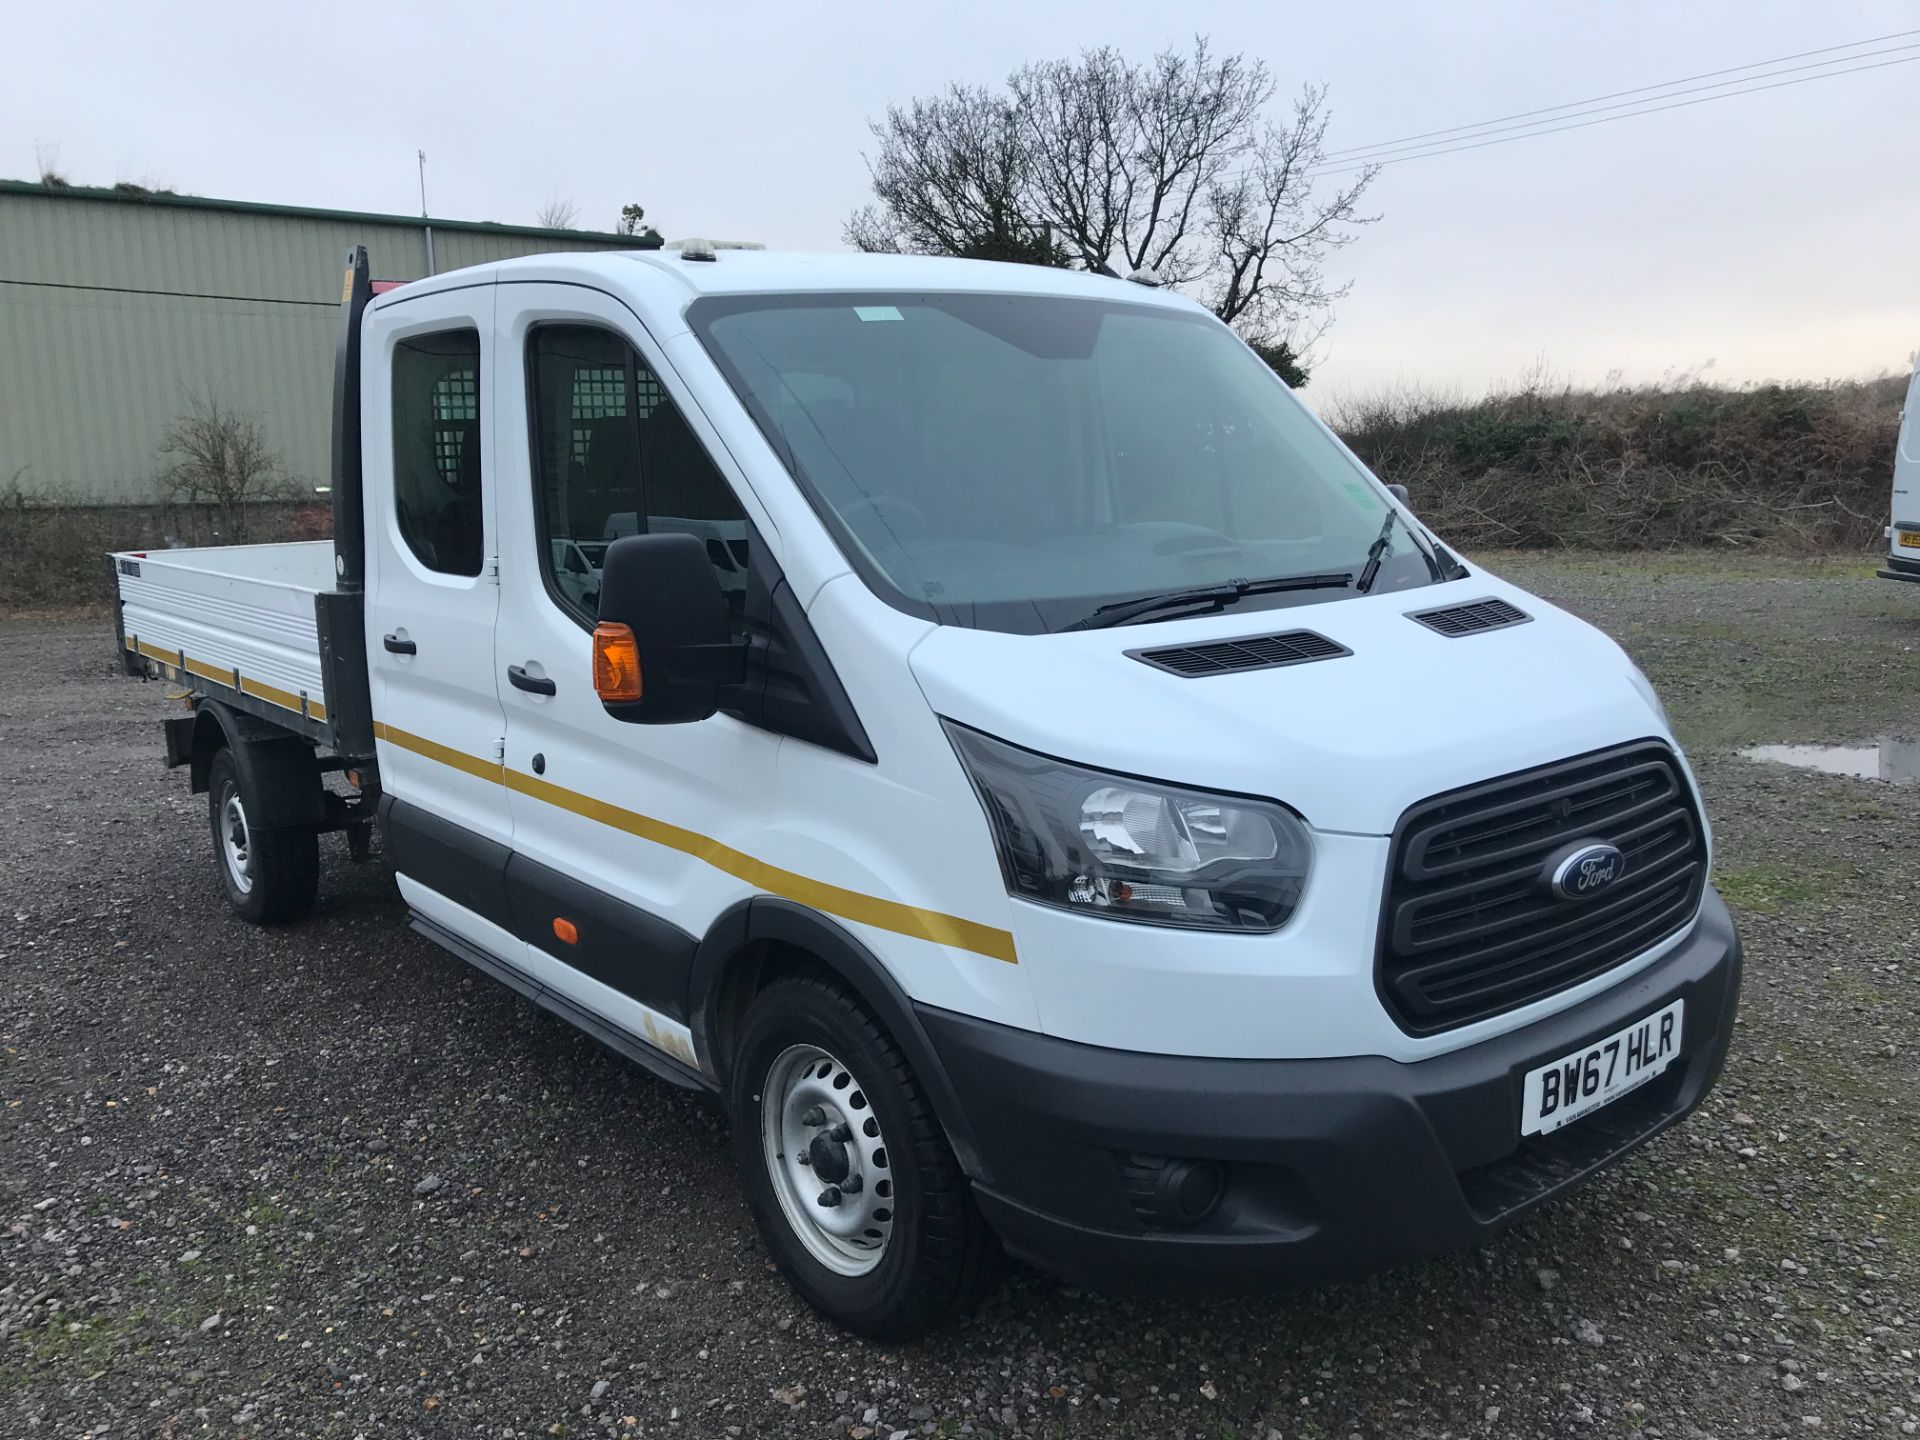 2018 Ford Transit 2.0 Tdci 130Ps One Stop D/Cab Tipper [1 Way] Euro 6 (BW67HLR)